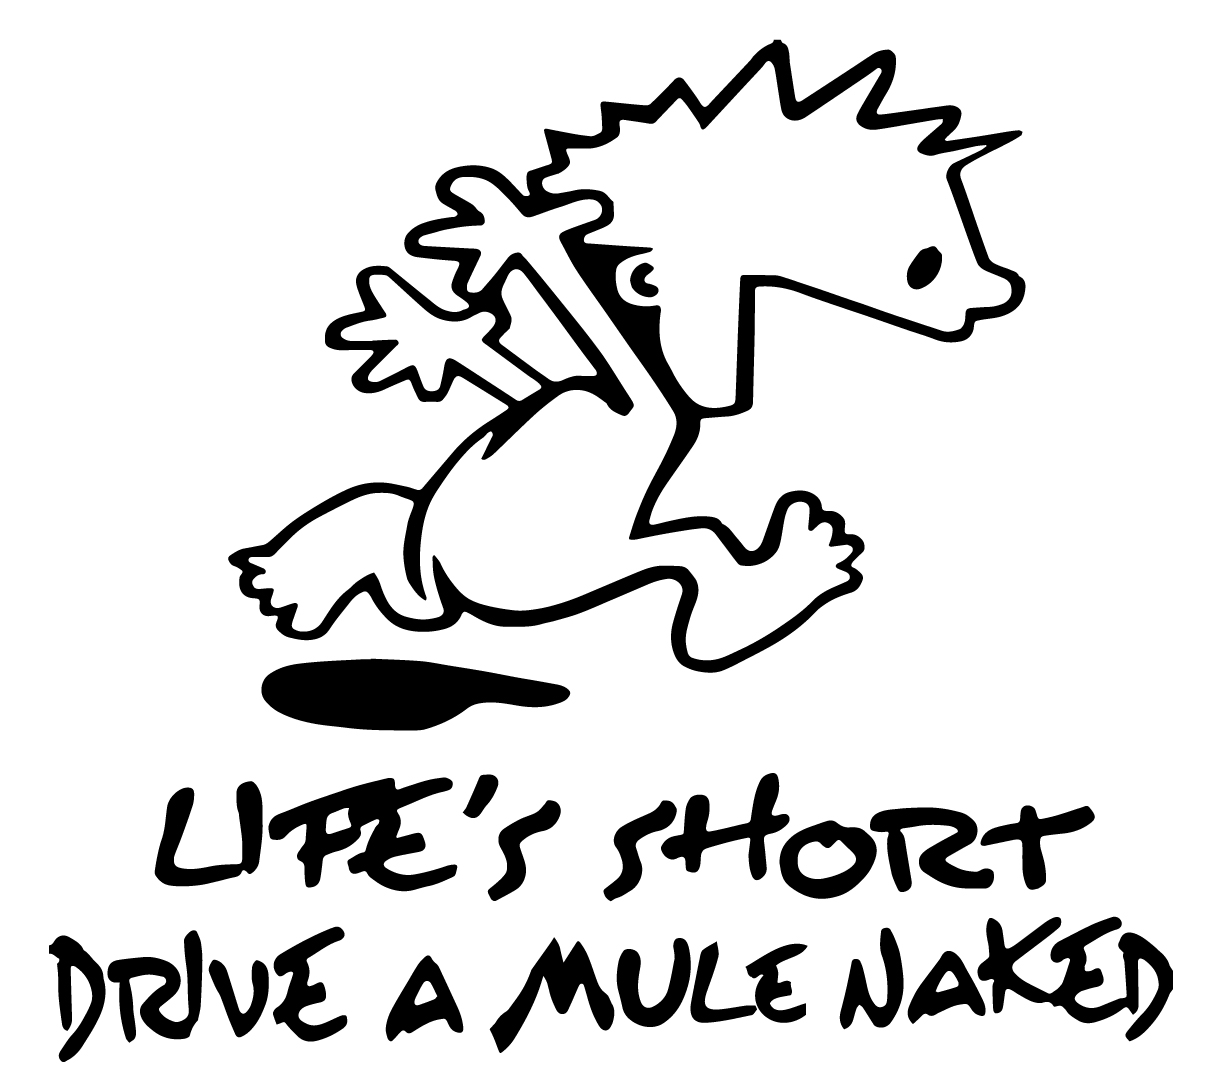 Lifes Short Ride a Mule Naked